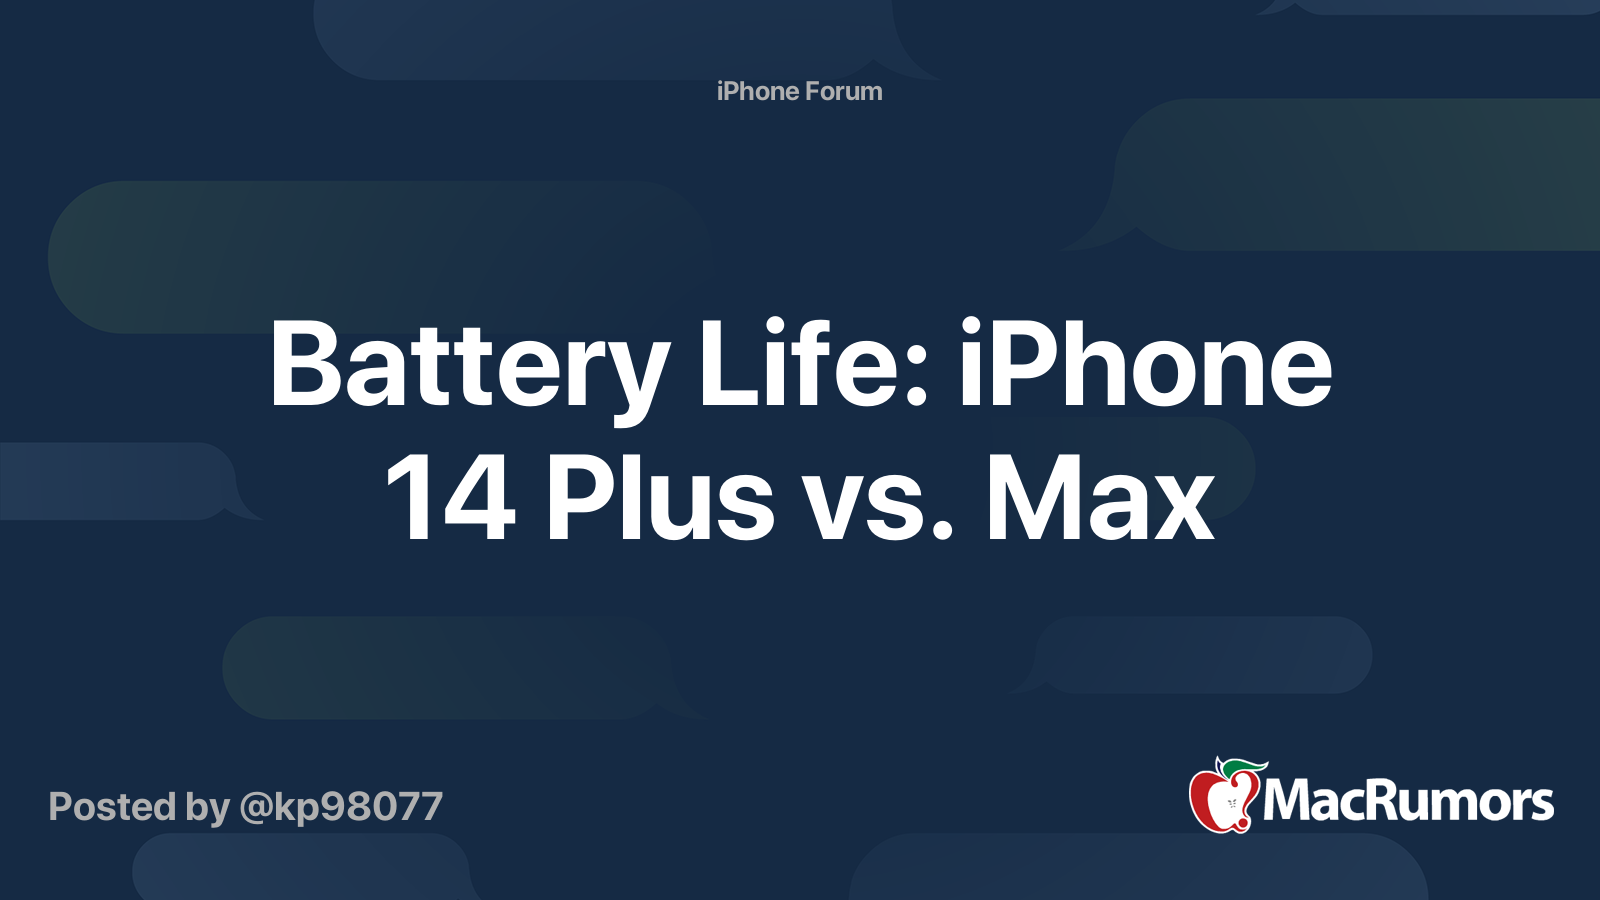 Review: iPhone 14 Plus is the new battery king